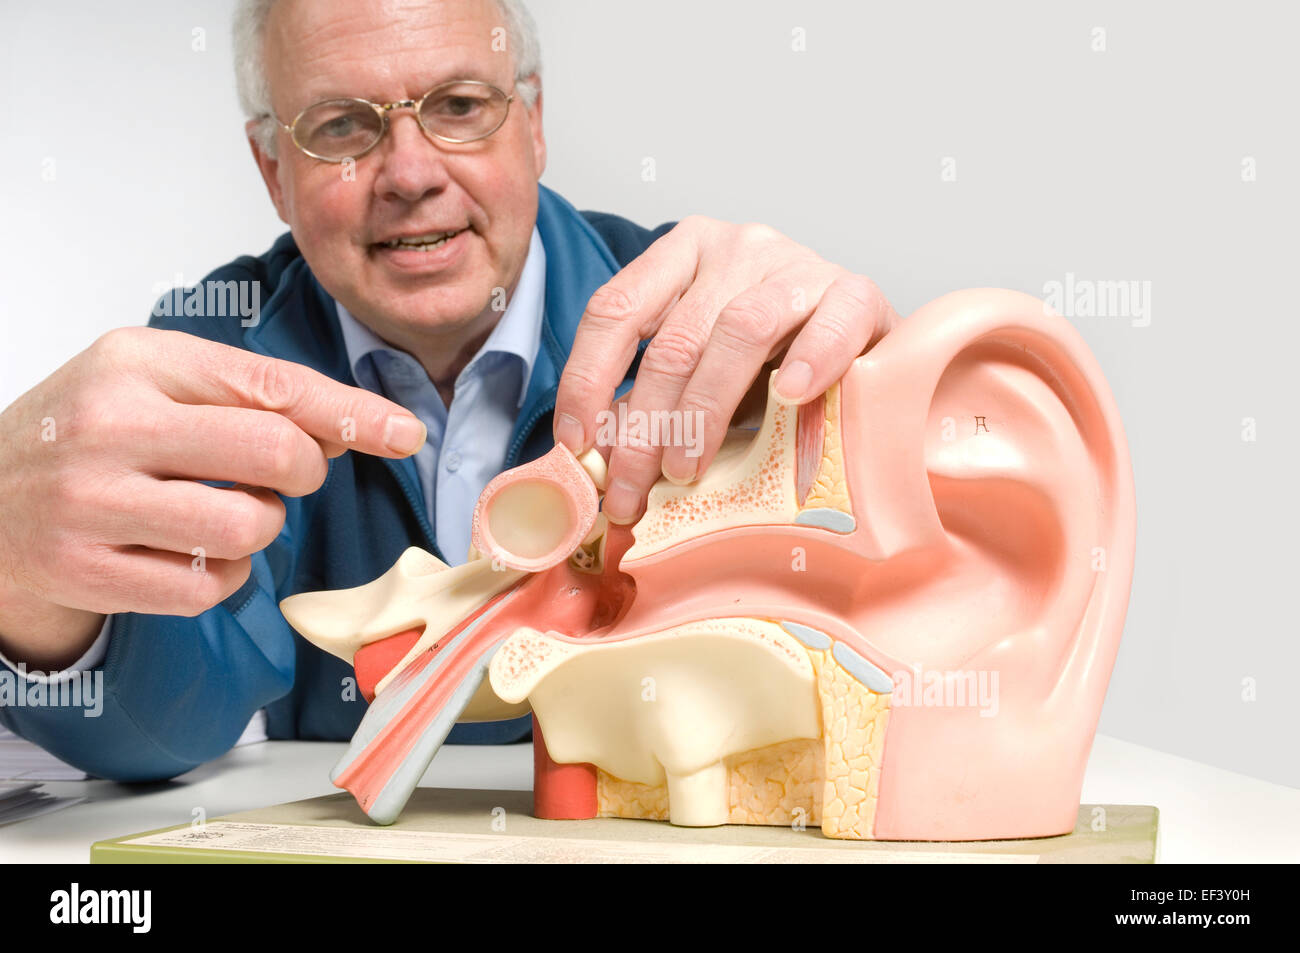 Man pointing to a model of the human ear Stock Photo